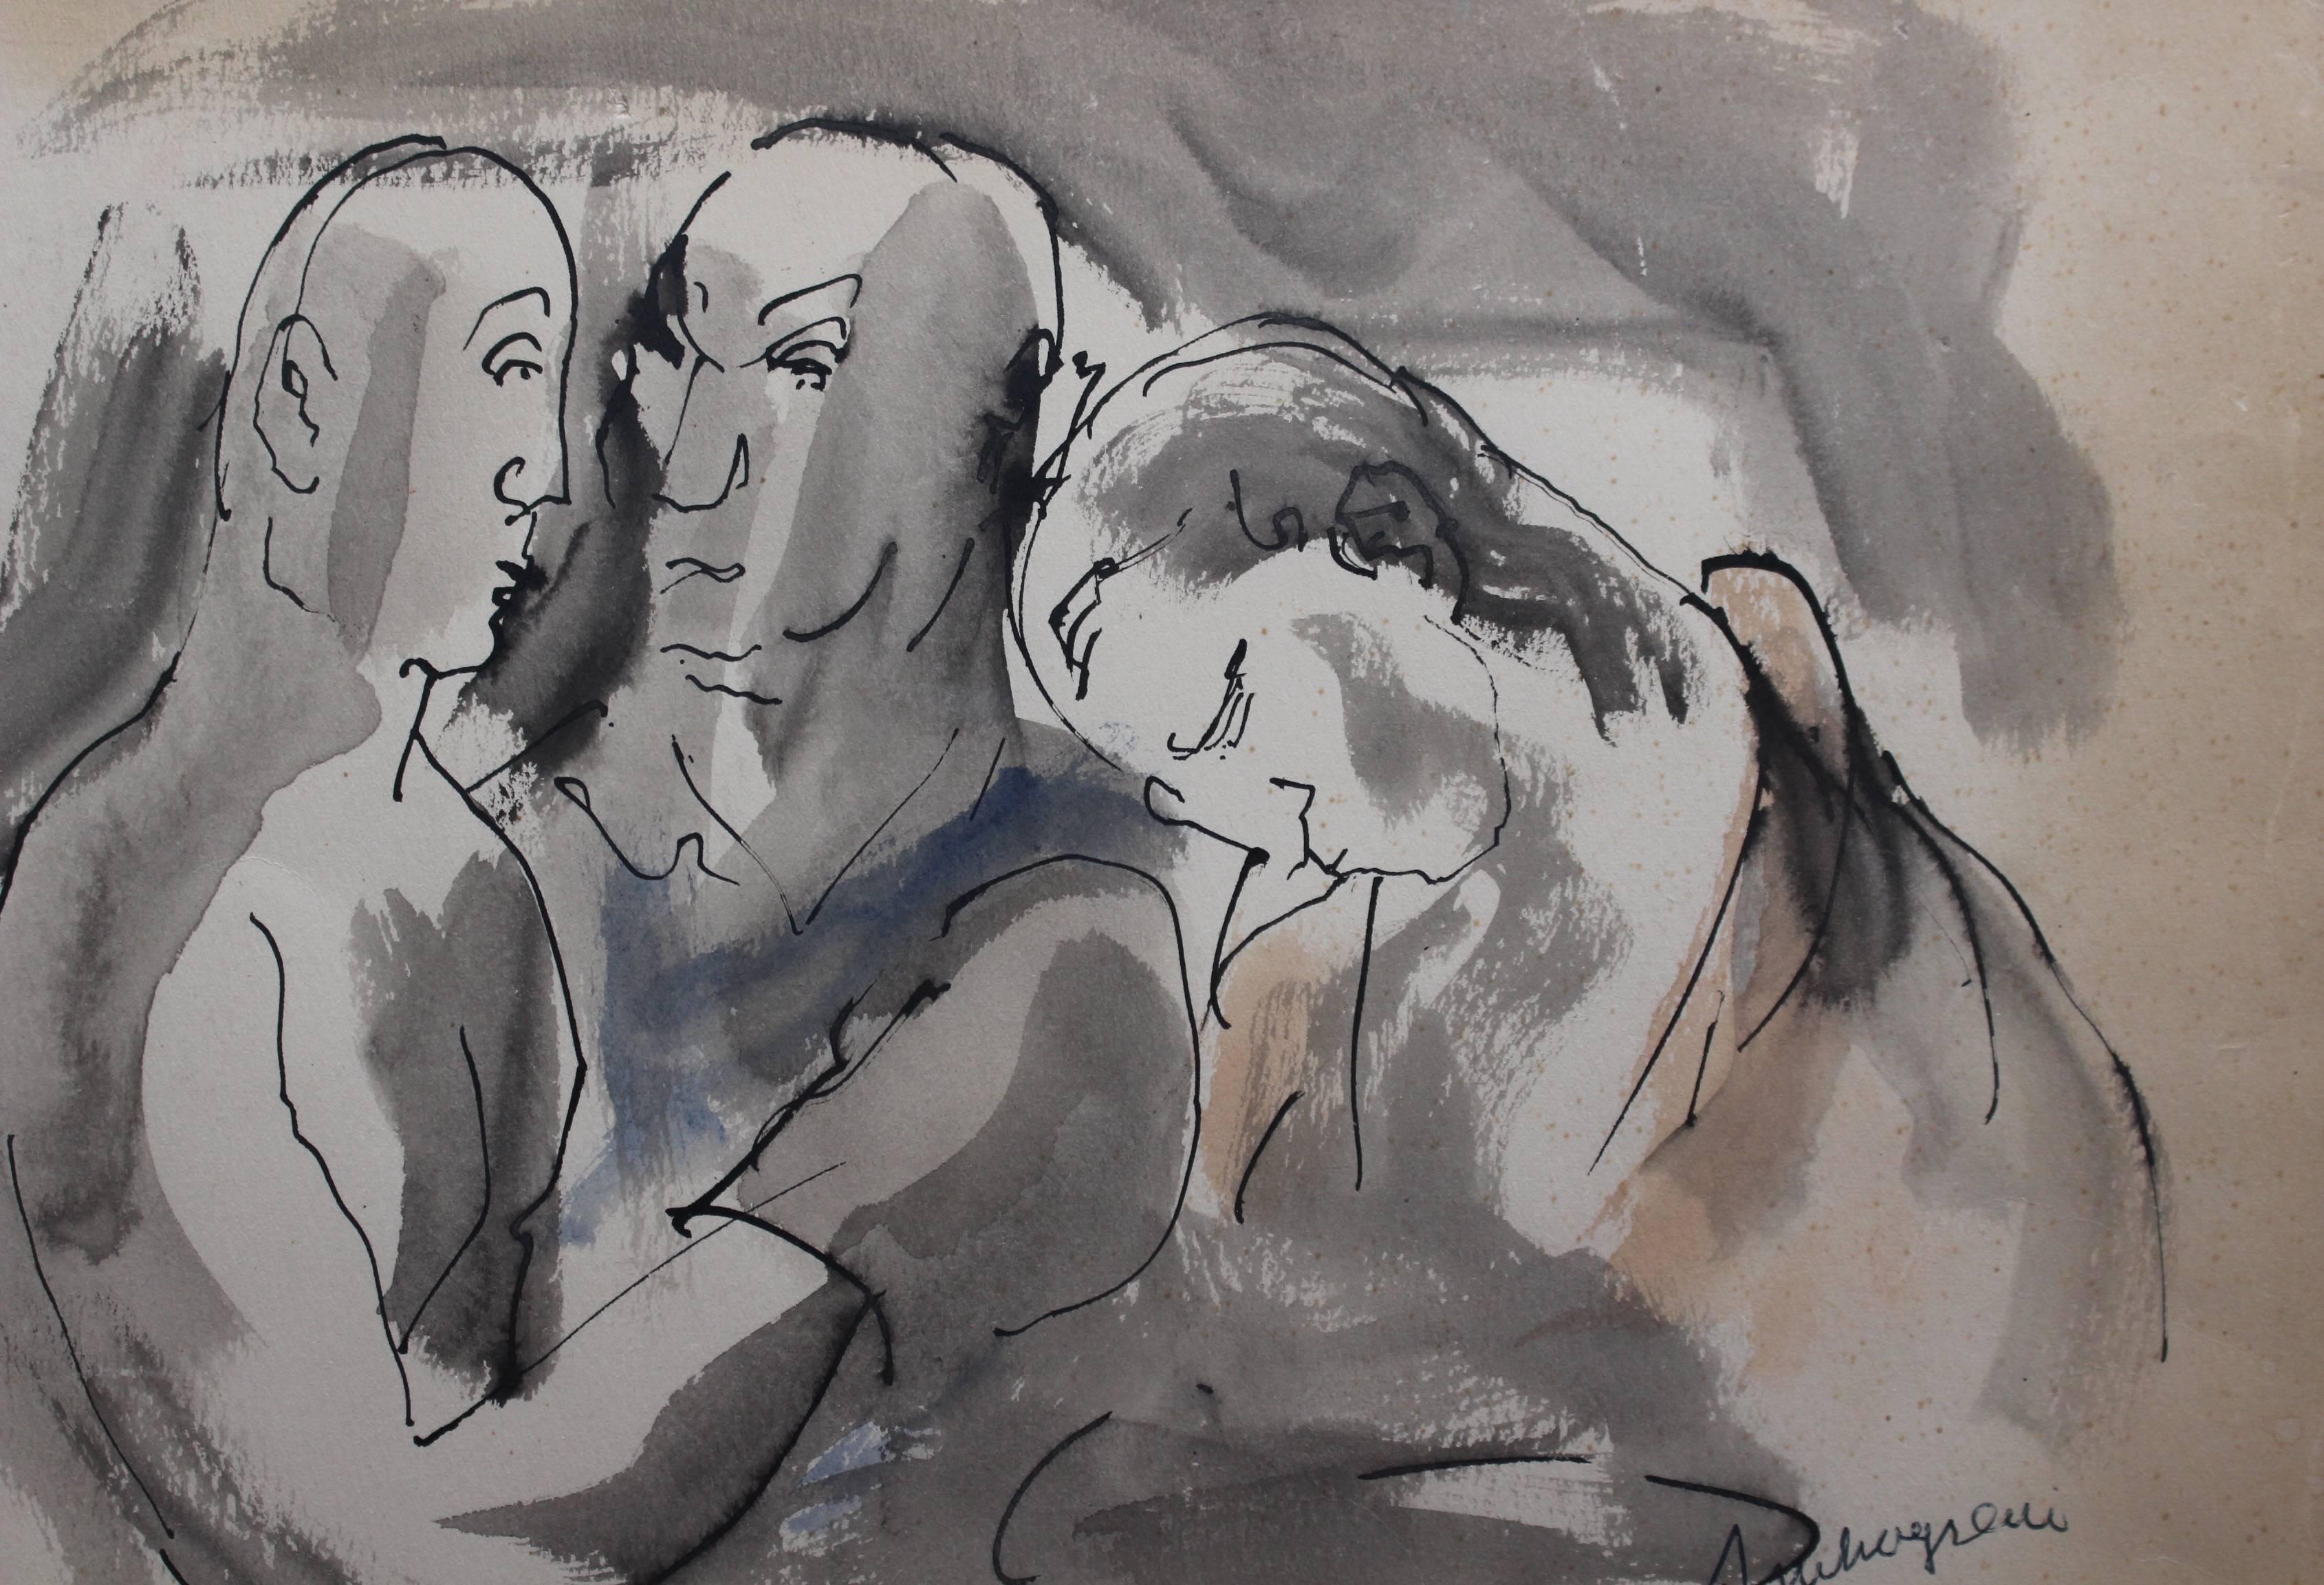 'Les  Boxeurs', an somewhat unusual subject amongst his body of work, this ink and watercolour on paper depicts two boxers being separated by a referee. Ambrogiani's depiction of their facial expressions and posture say it all: one boxer is